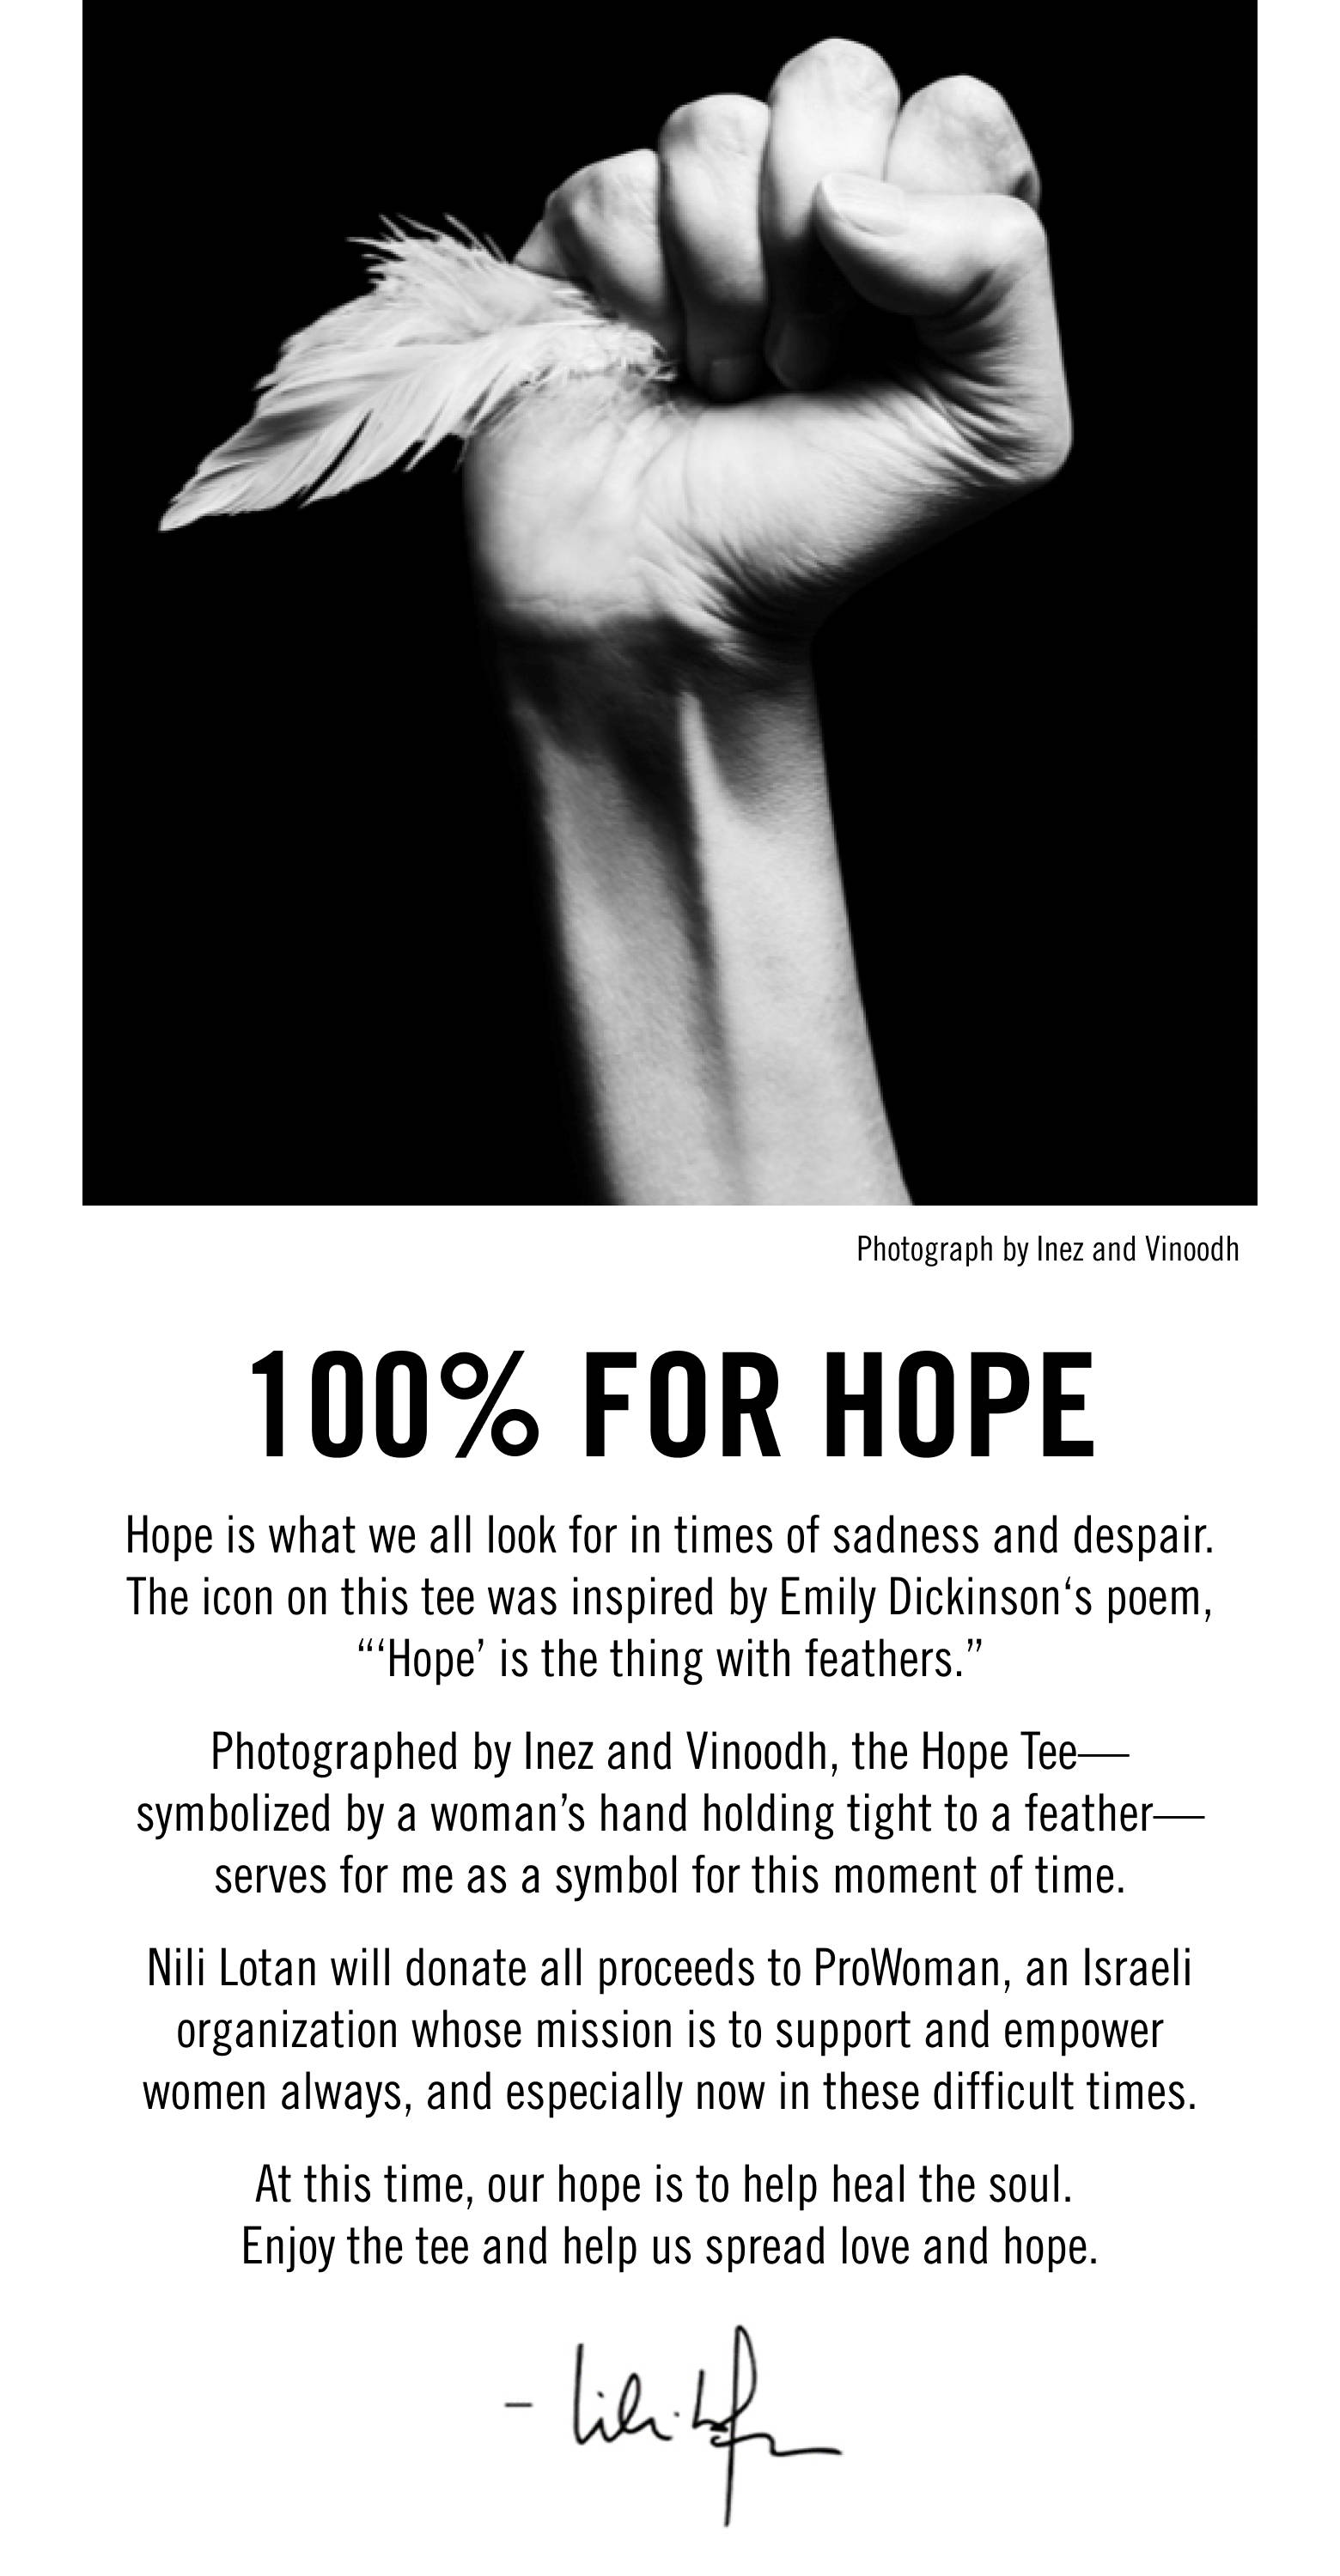 A black and white photo of a hand holding a feather with a description of what hope means.